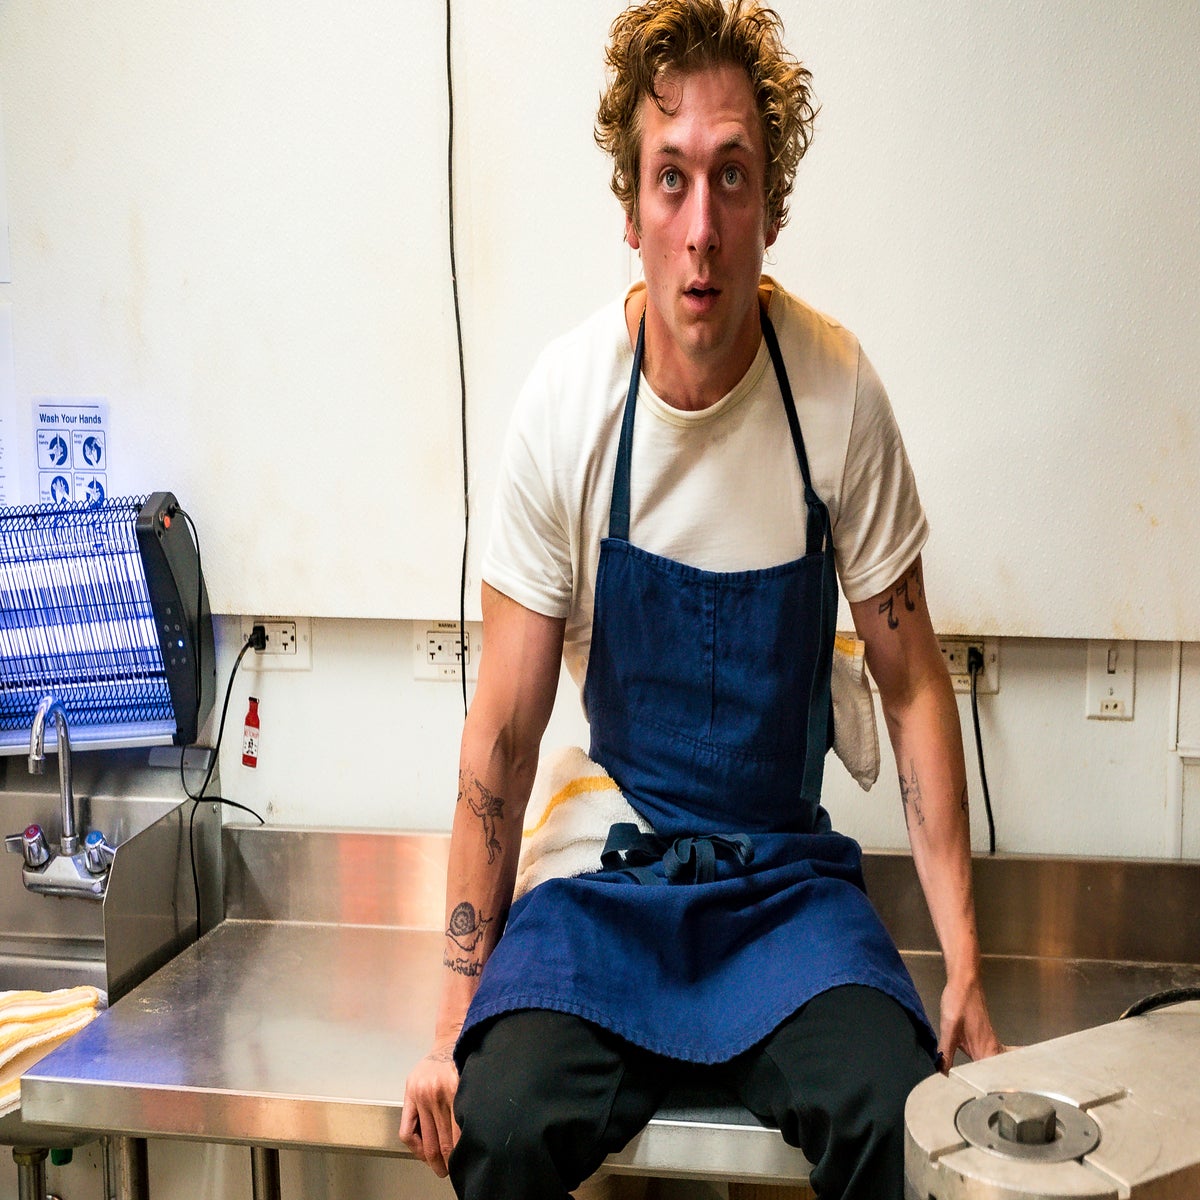 Watch: Jeremy Allen White shows off his impressive physique in new